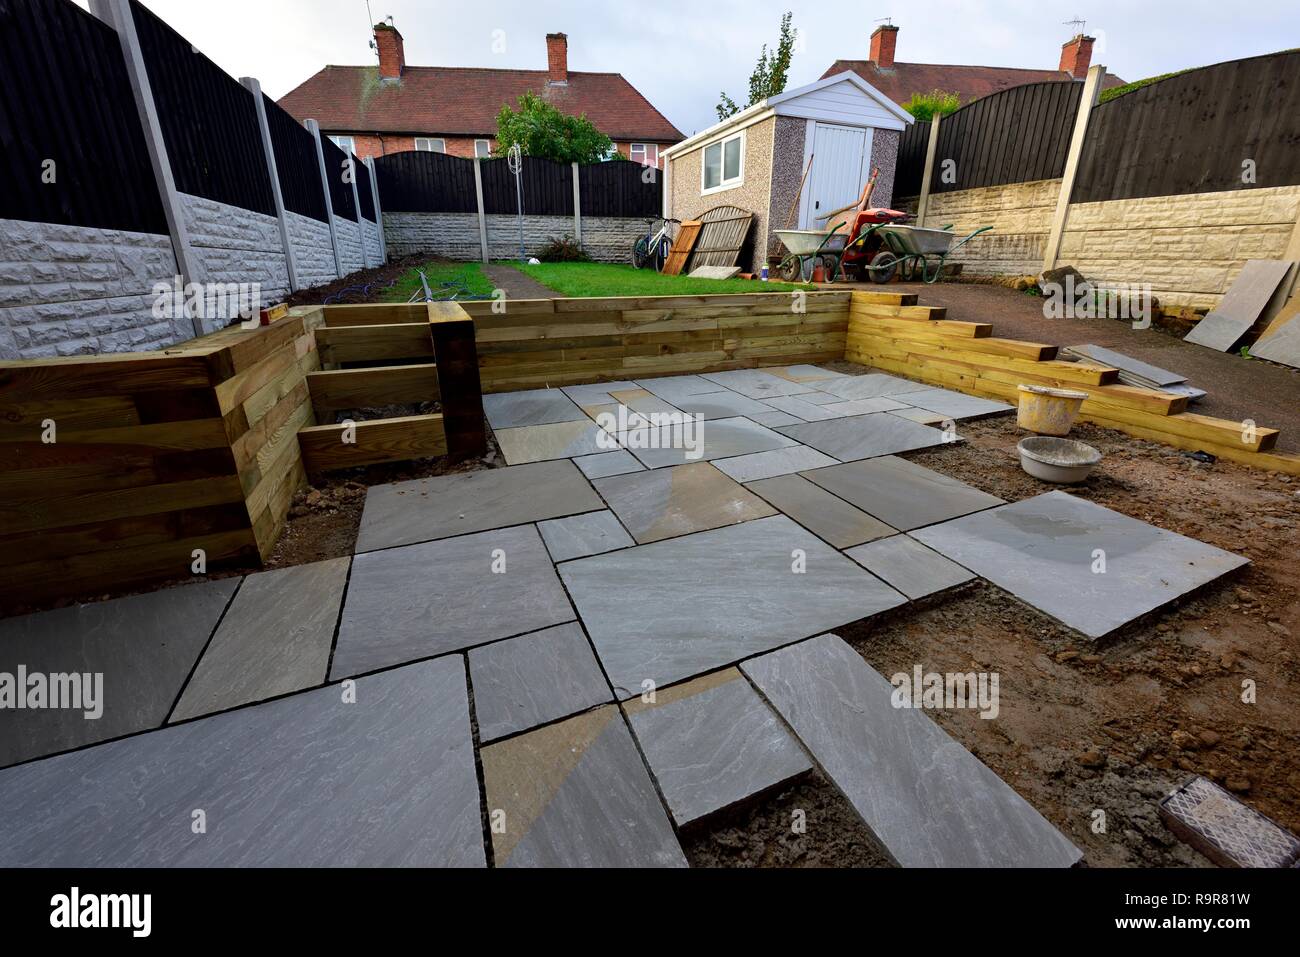 Indian paving slabs being laid on a garden patio garden renovation UK Stock Photo